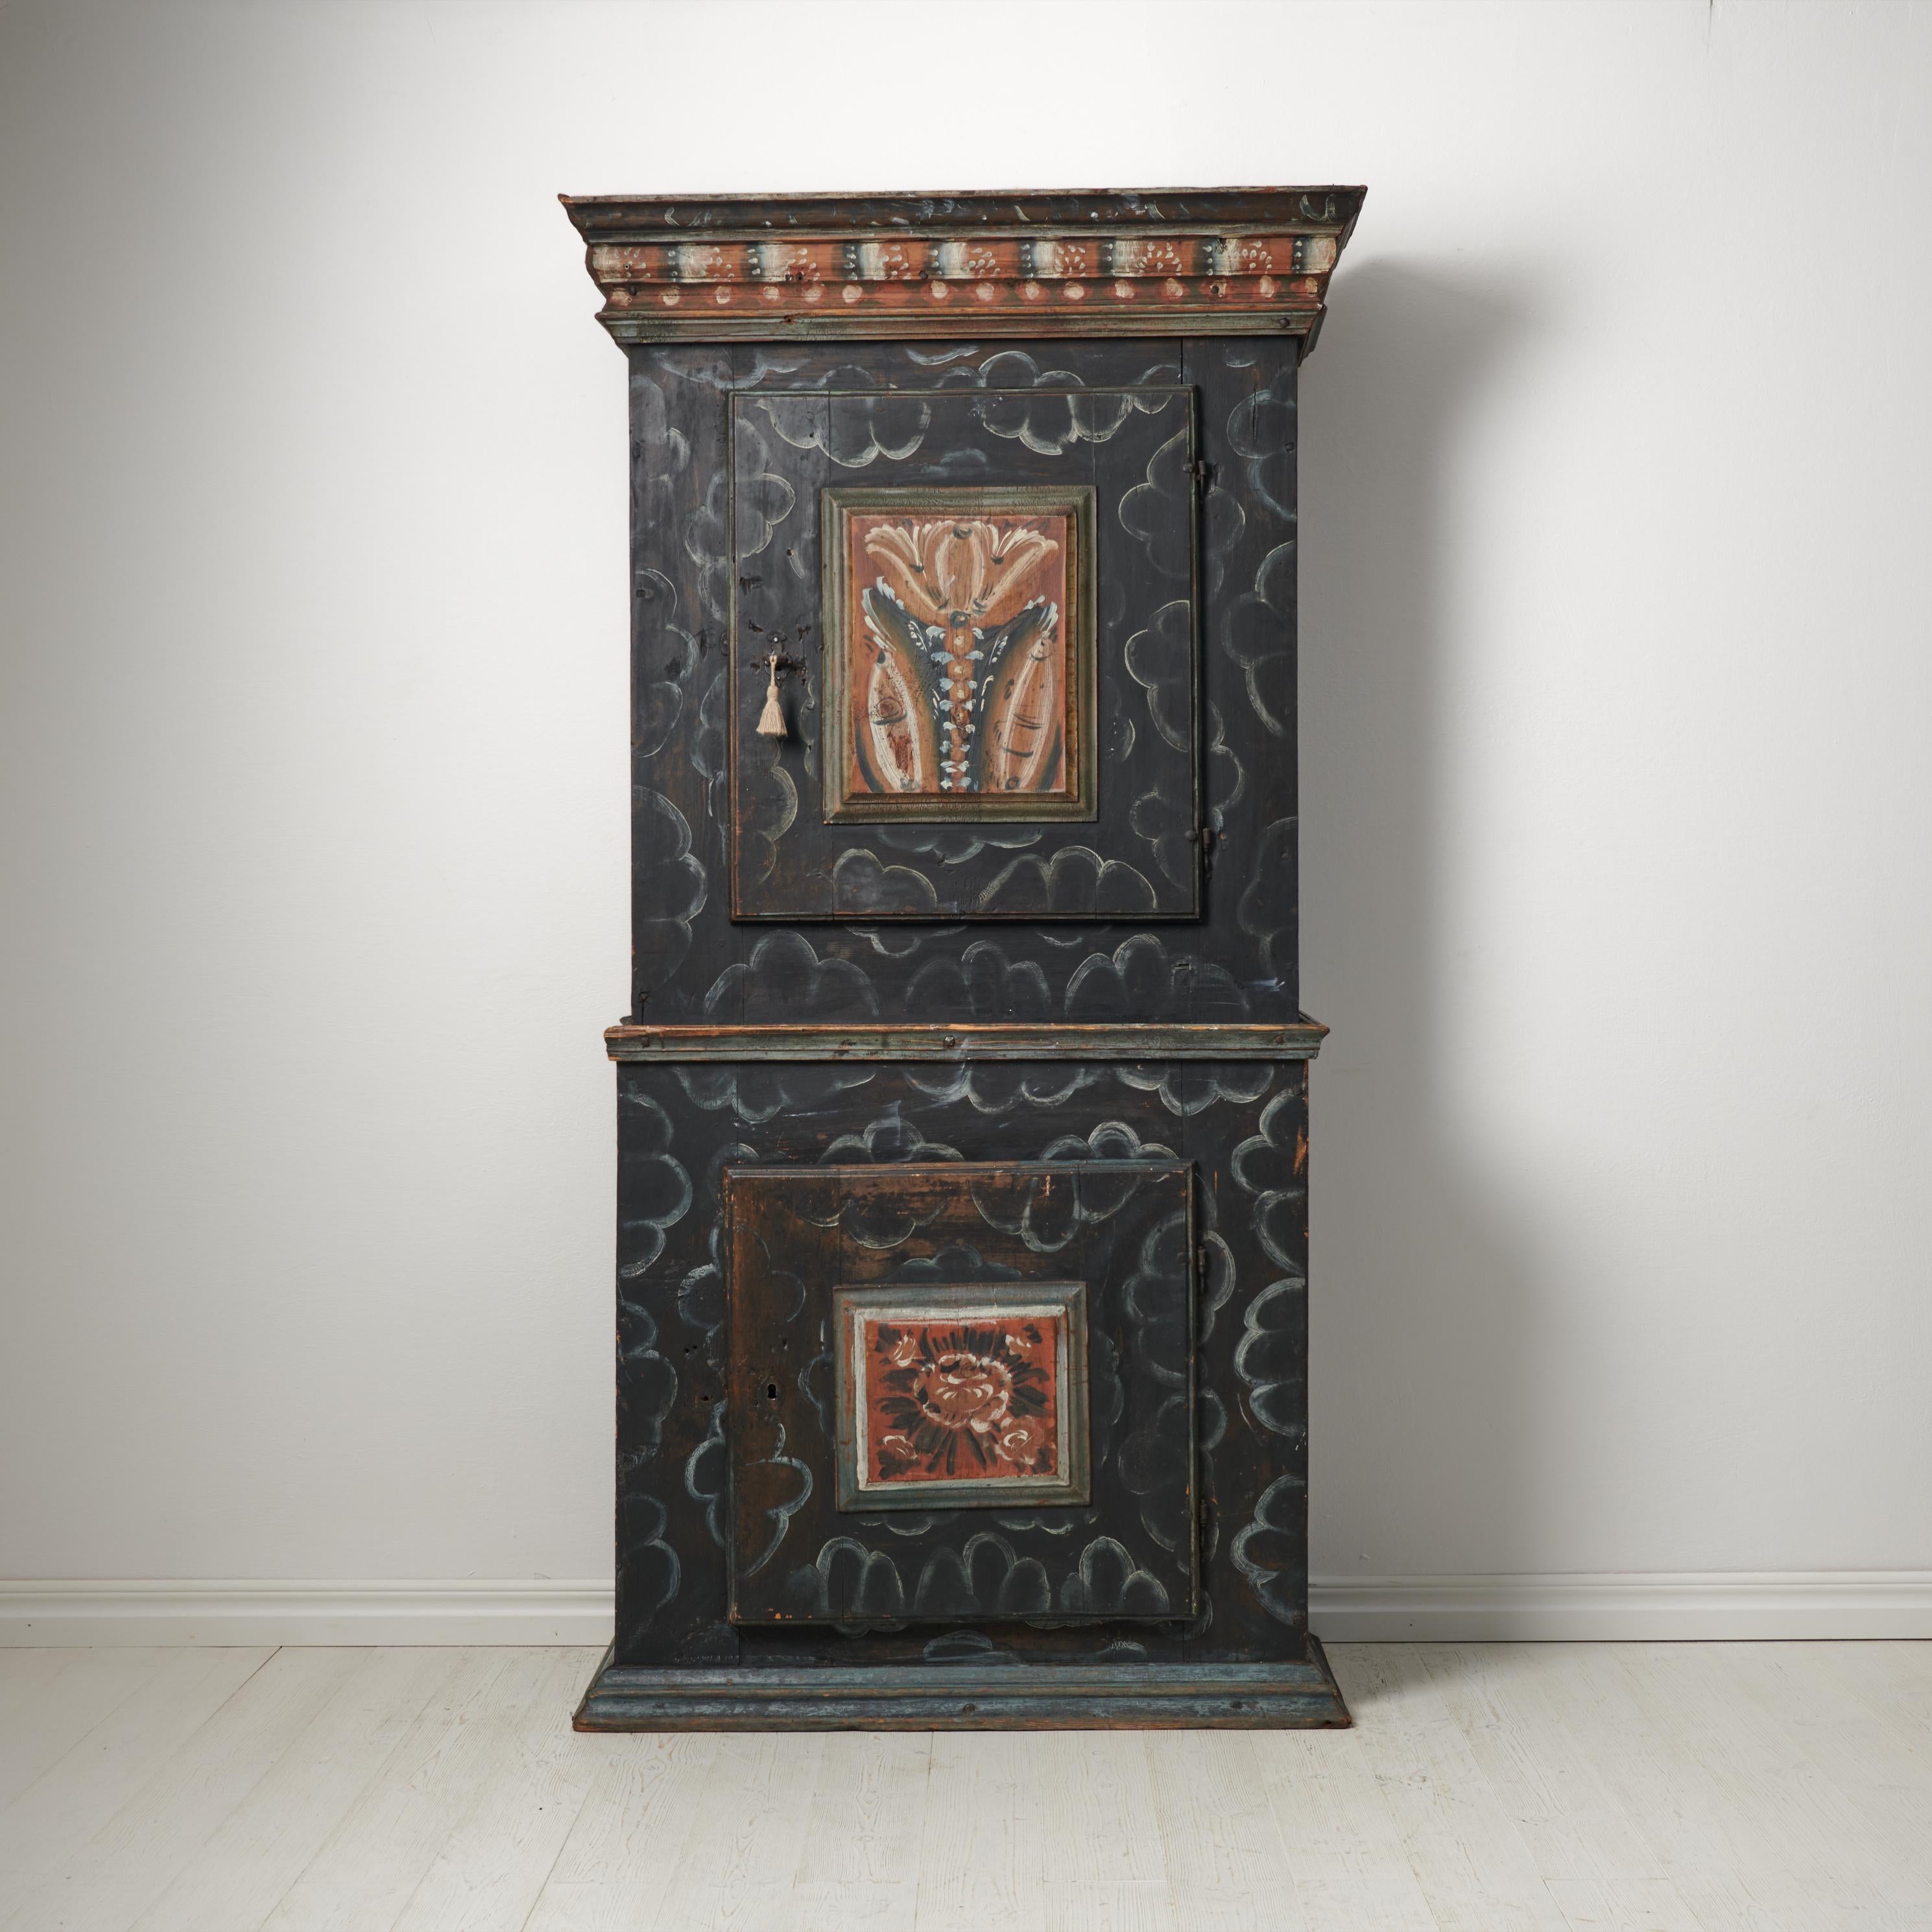 Rare folk art cabinet from Järvsö in Hälsingland, Sweden. The cabinet is made by hand in solid pine around 1790 to 1810 and has the original paint which is in very good condition. Note that there are no clouds painted on the short ends of the